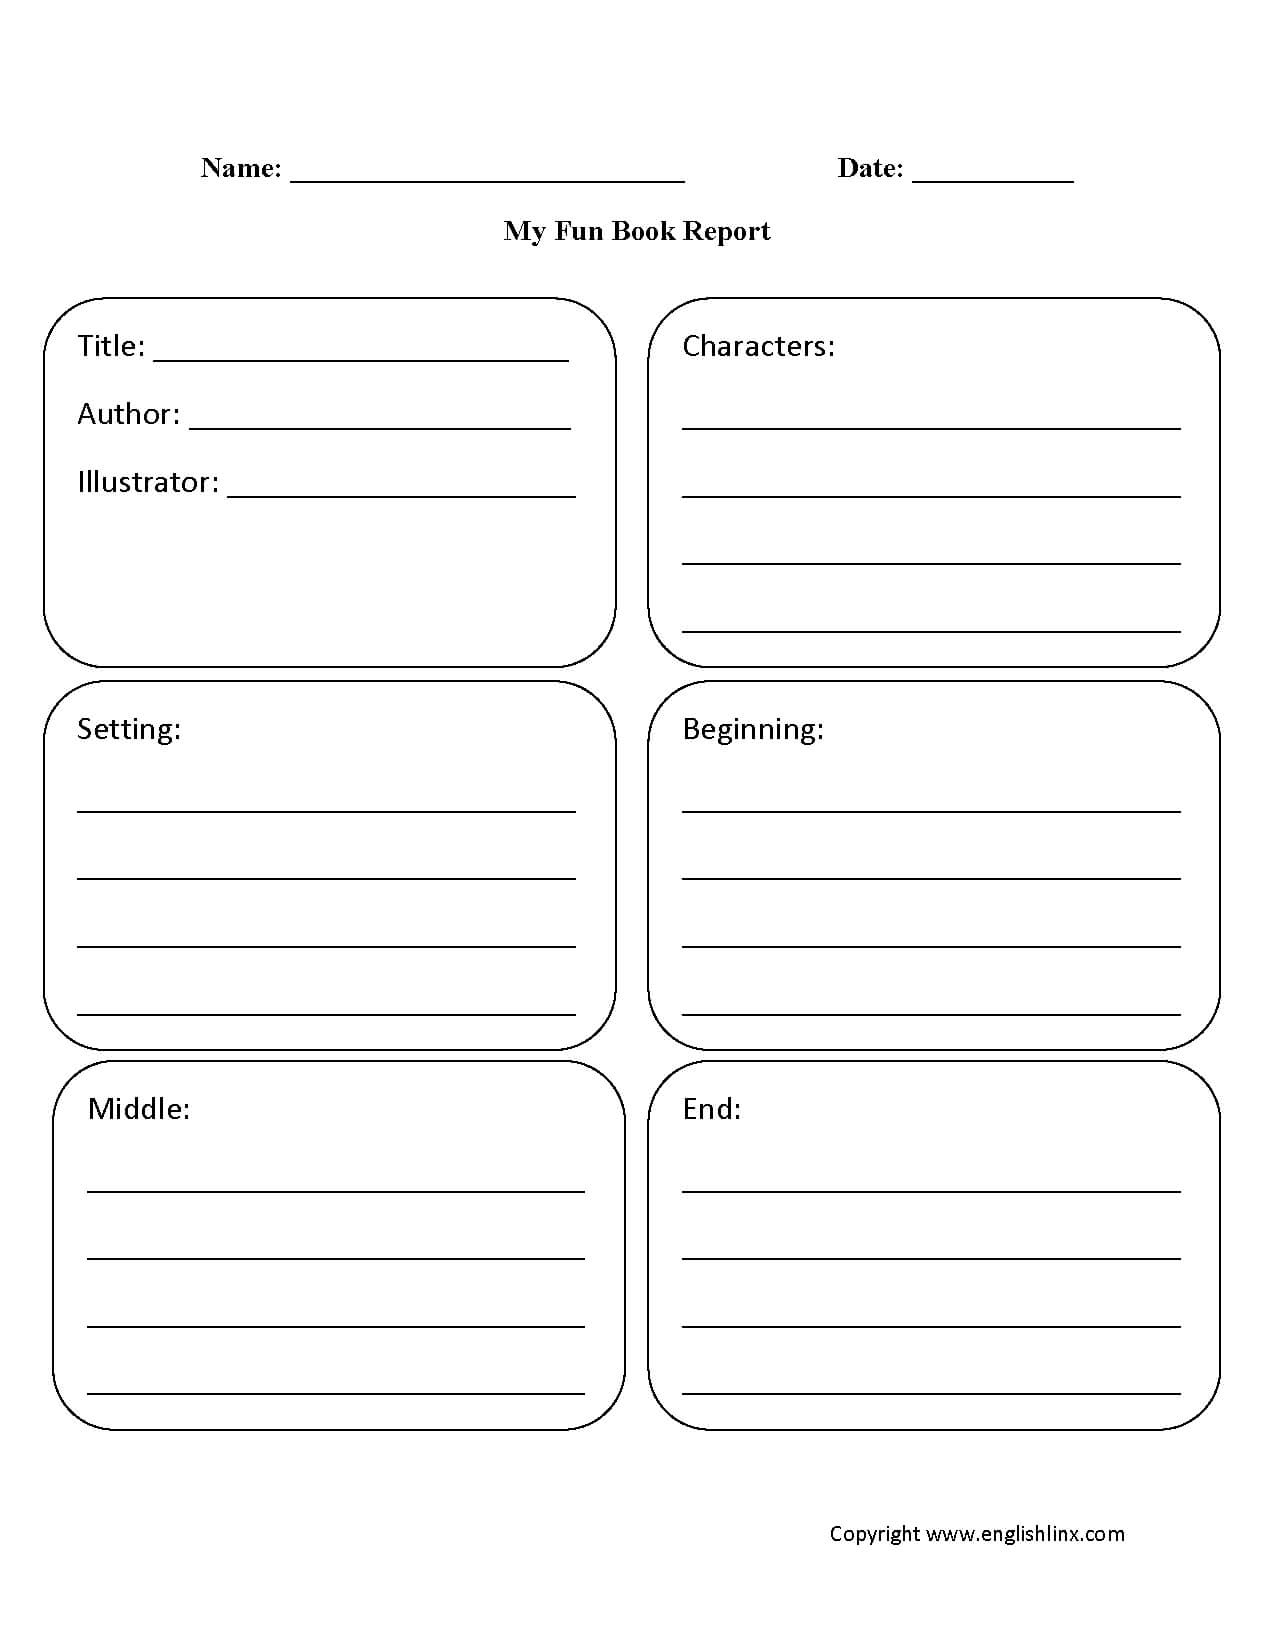 Englishlinx Book Report Worksheets pertaining to Book Report Template